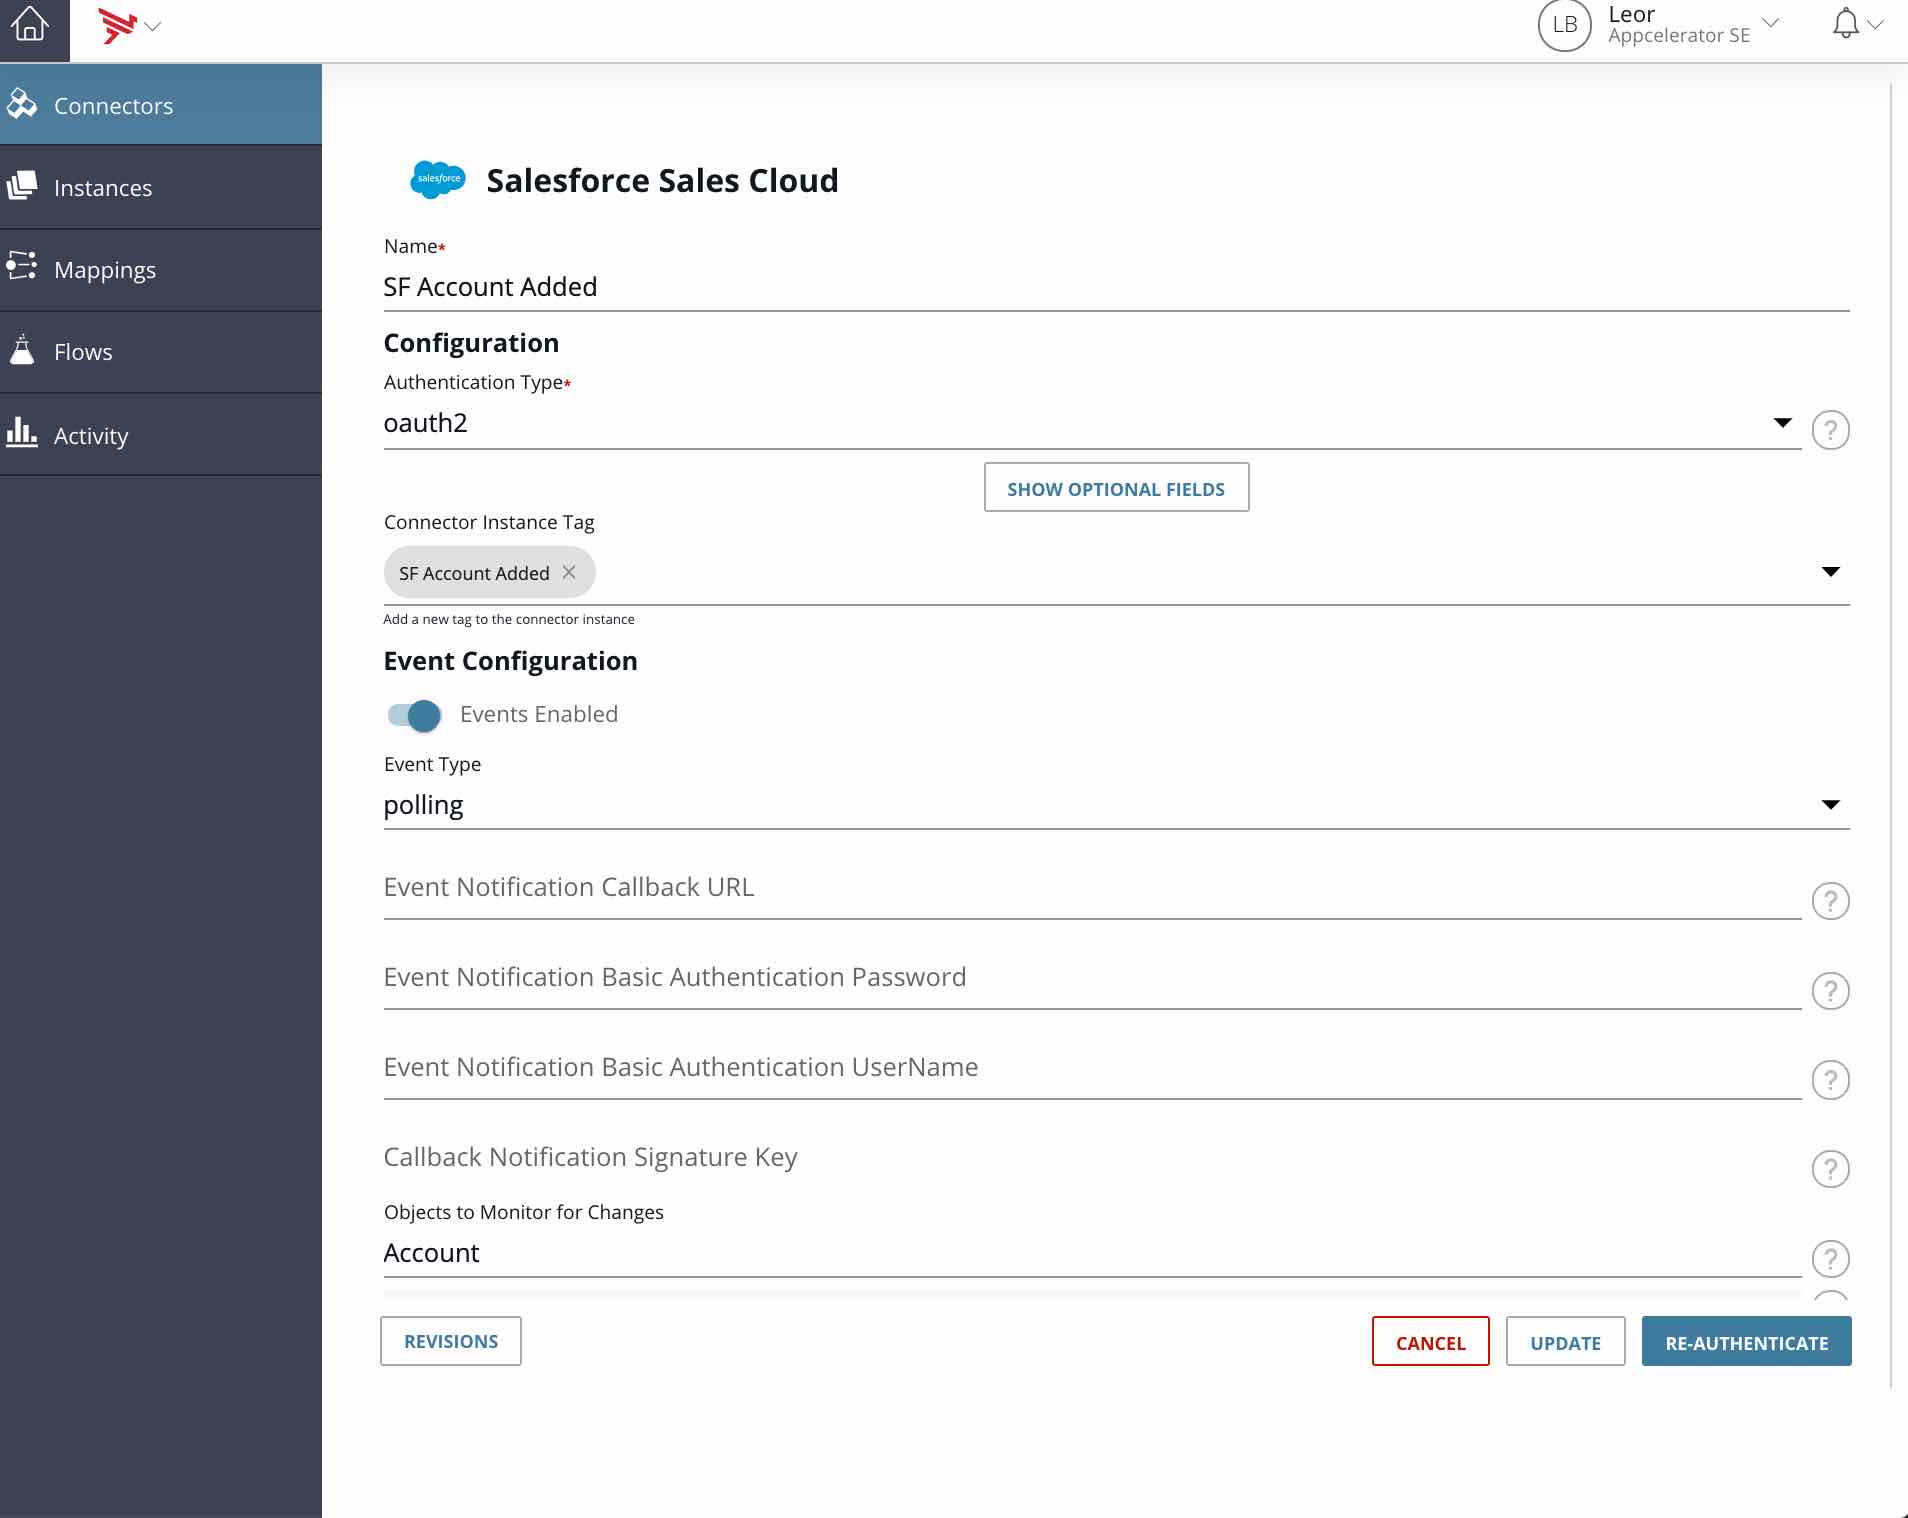 Salesforce Sales Cloud - SF Account Added